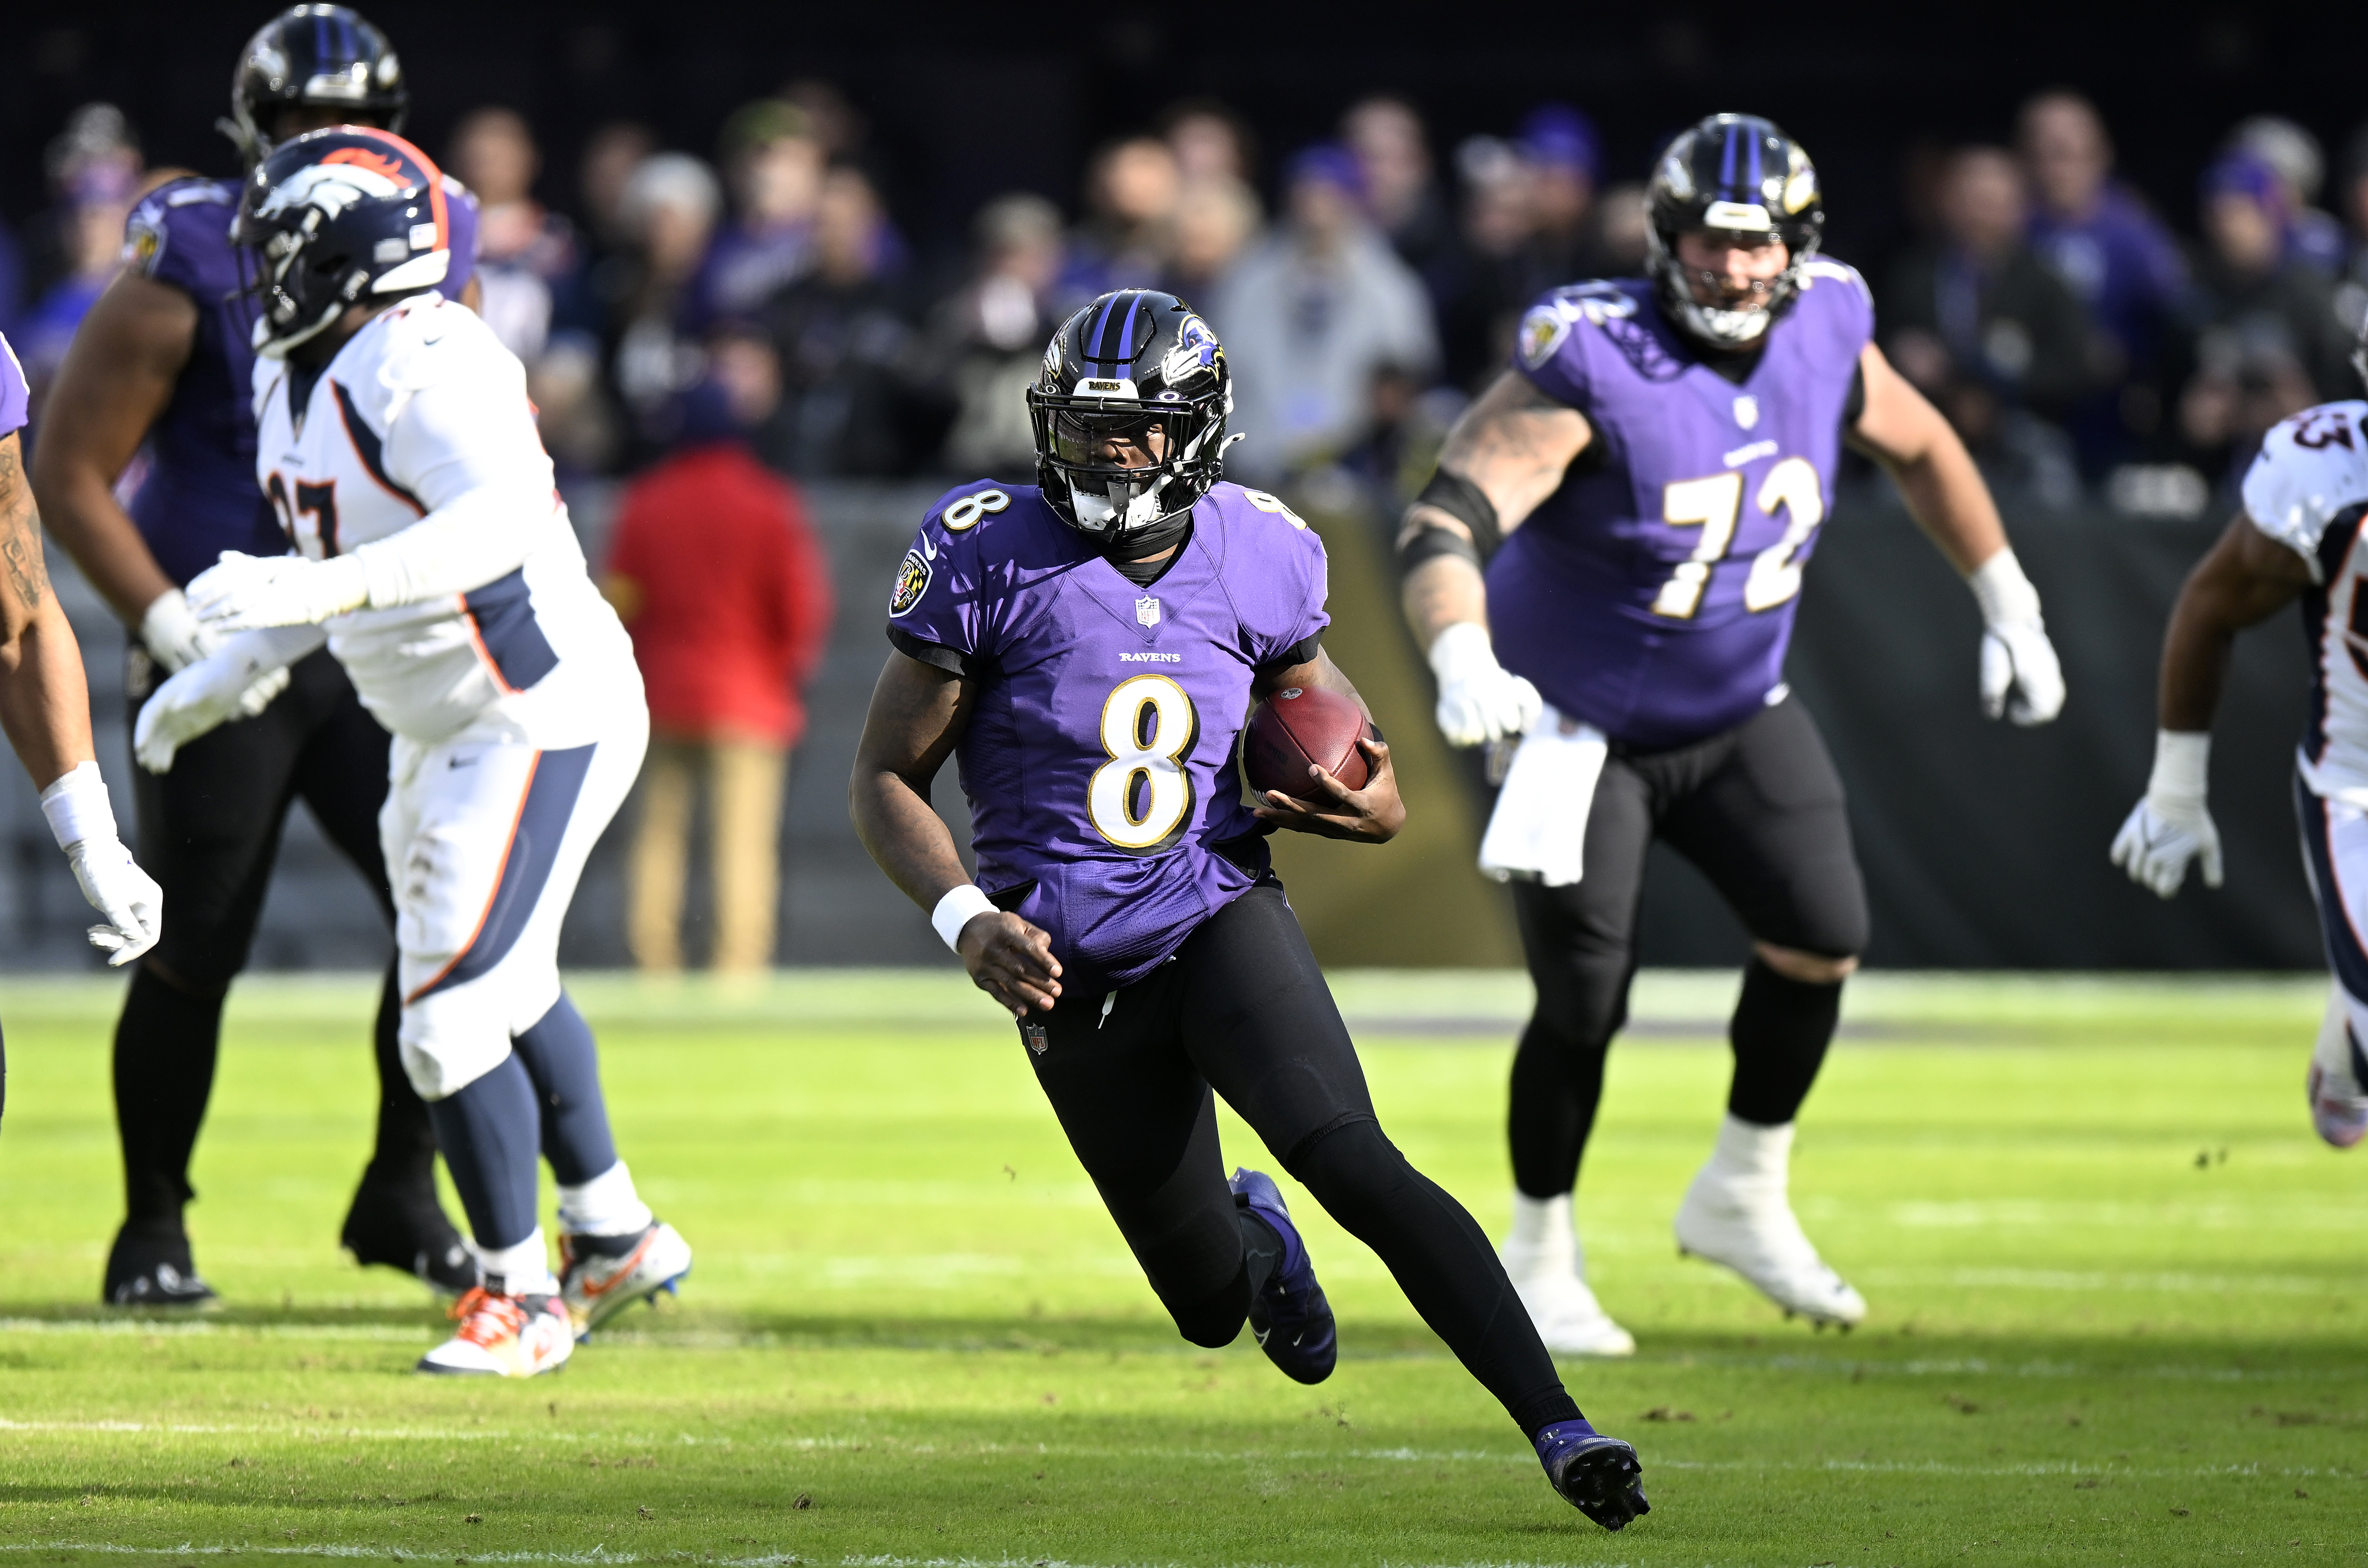 Quarterback Lamar Jackson (#8) of the Baltimore Ravens runs with the ball in the game against the Denver Broncos at M&T Bank Stadium in Baltimore, Maryland, December 4, 2022. /CFP 